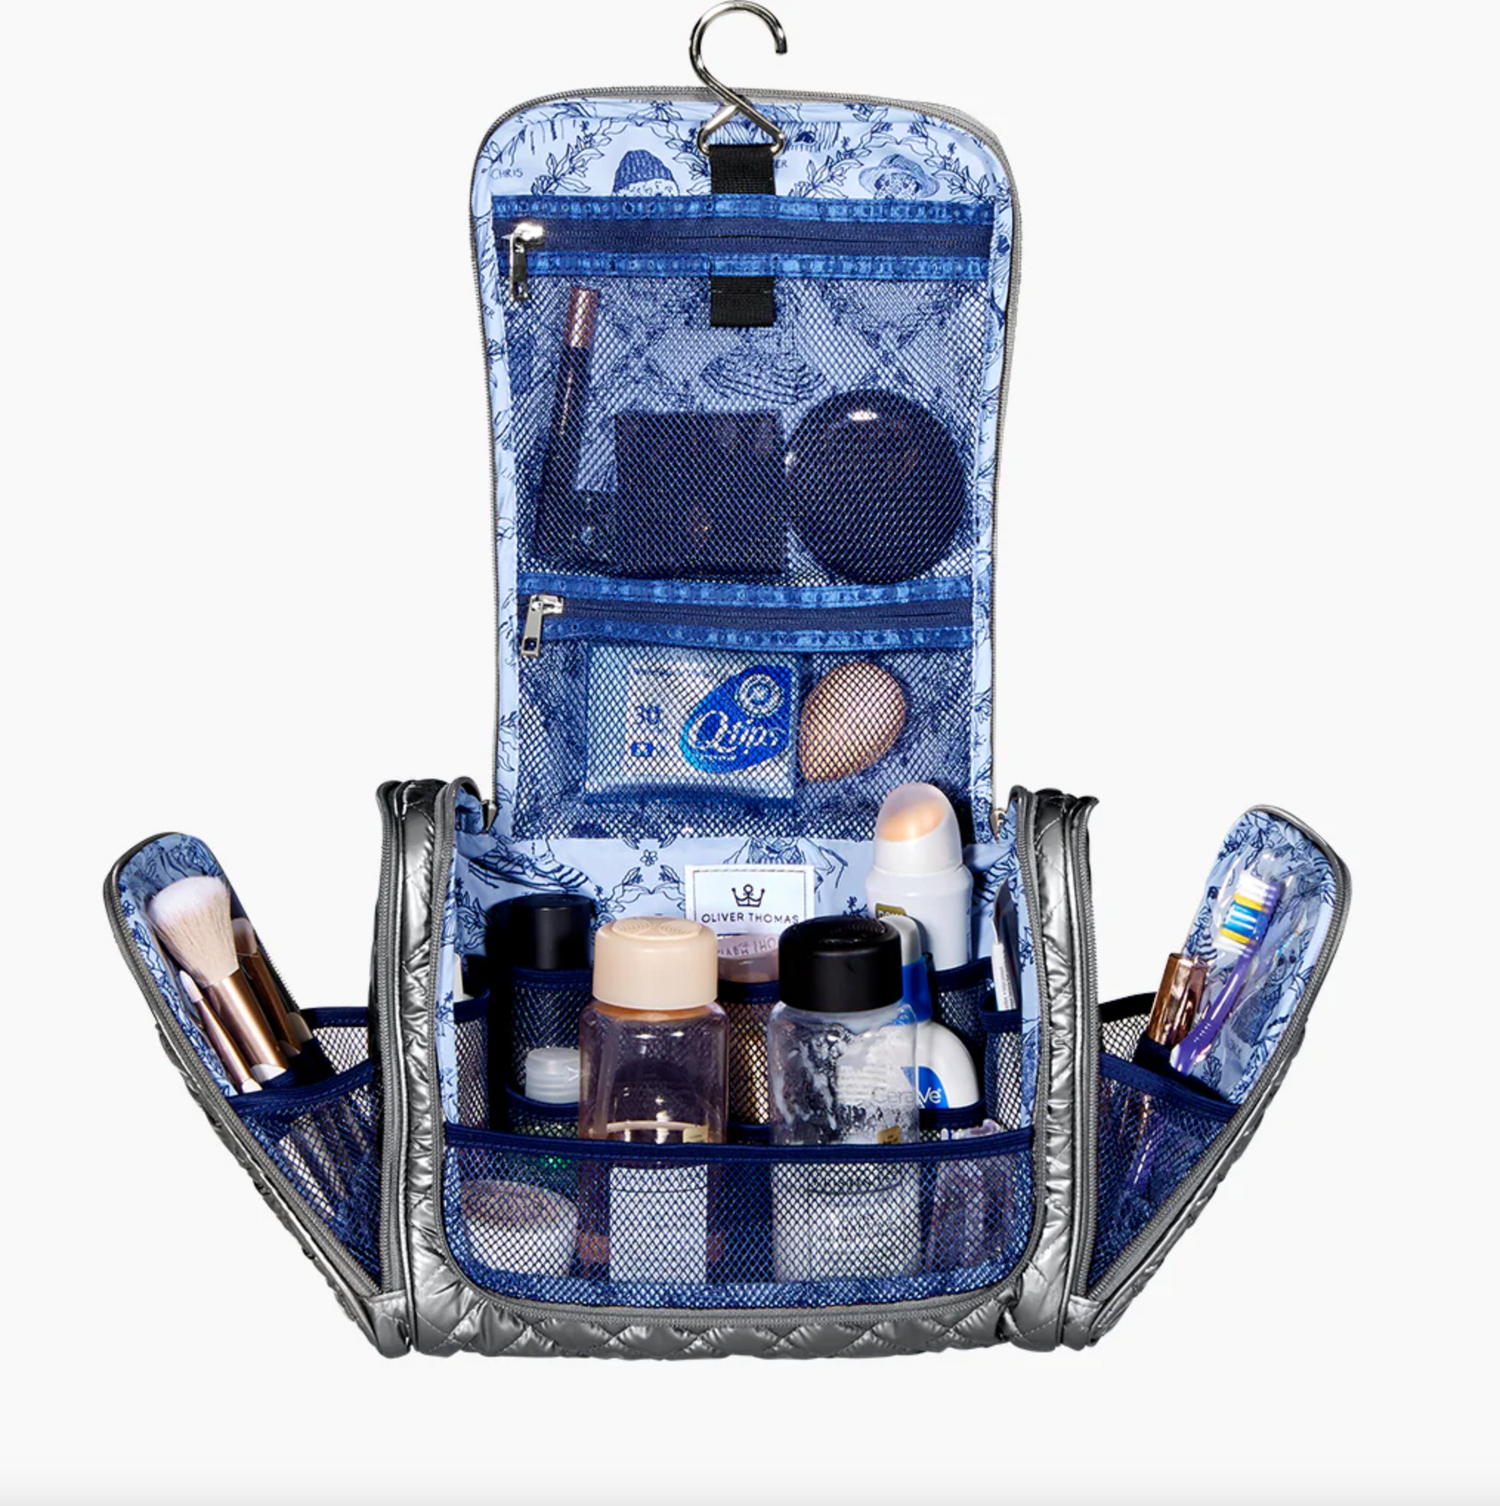 Oliver Thomas Hanging Travel Organizer Dove Grey Travel Accessories in  at Wrapsody